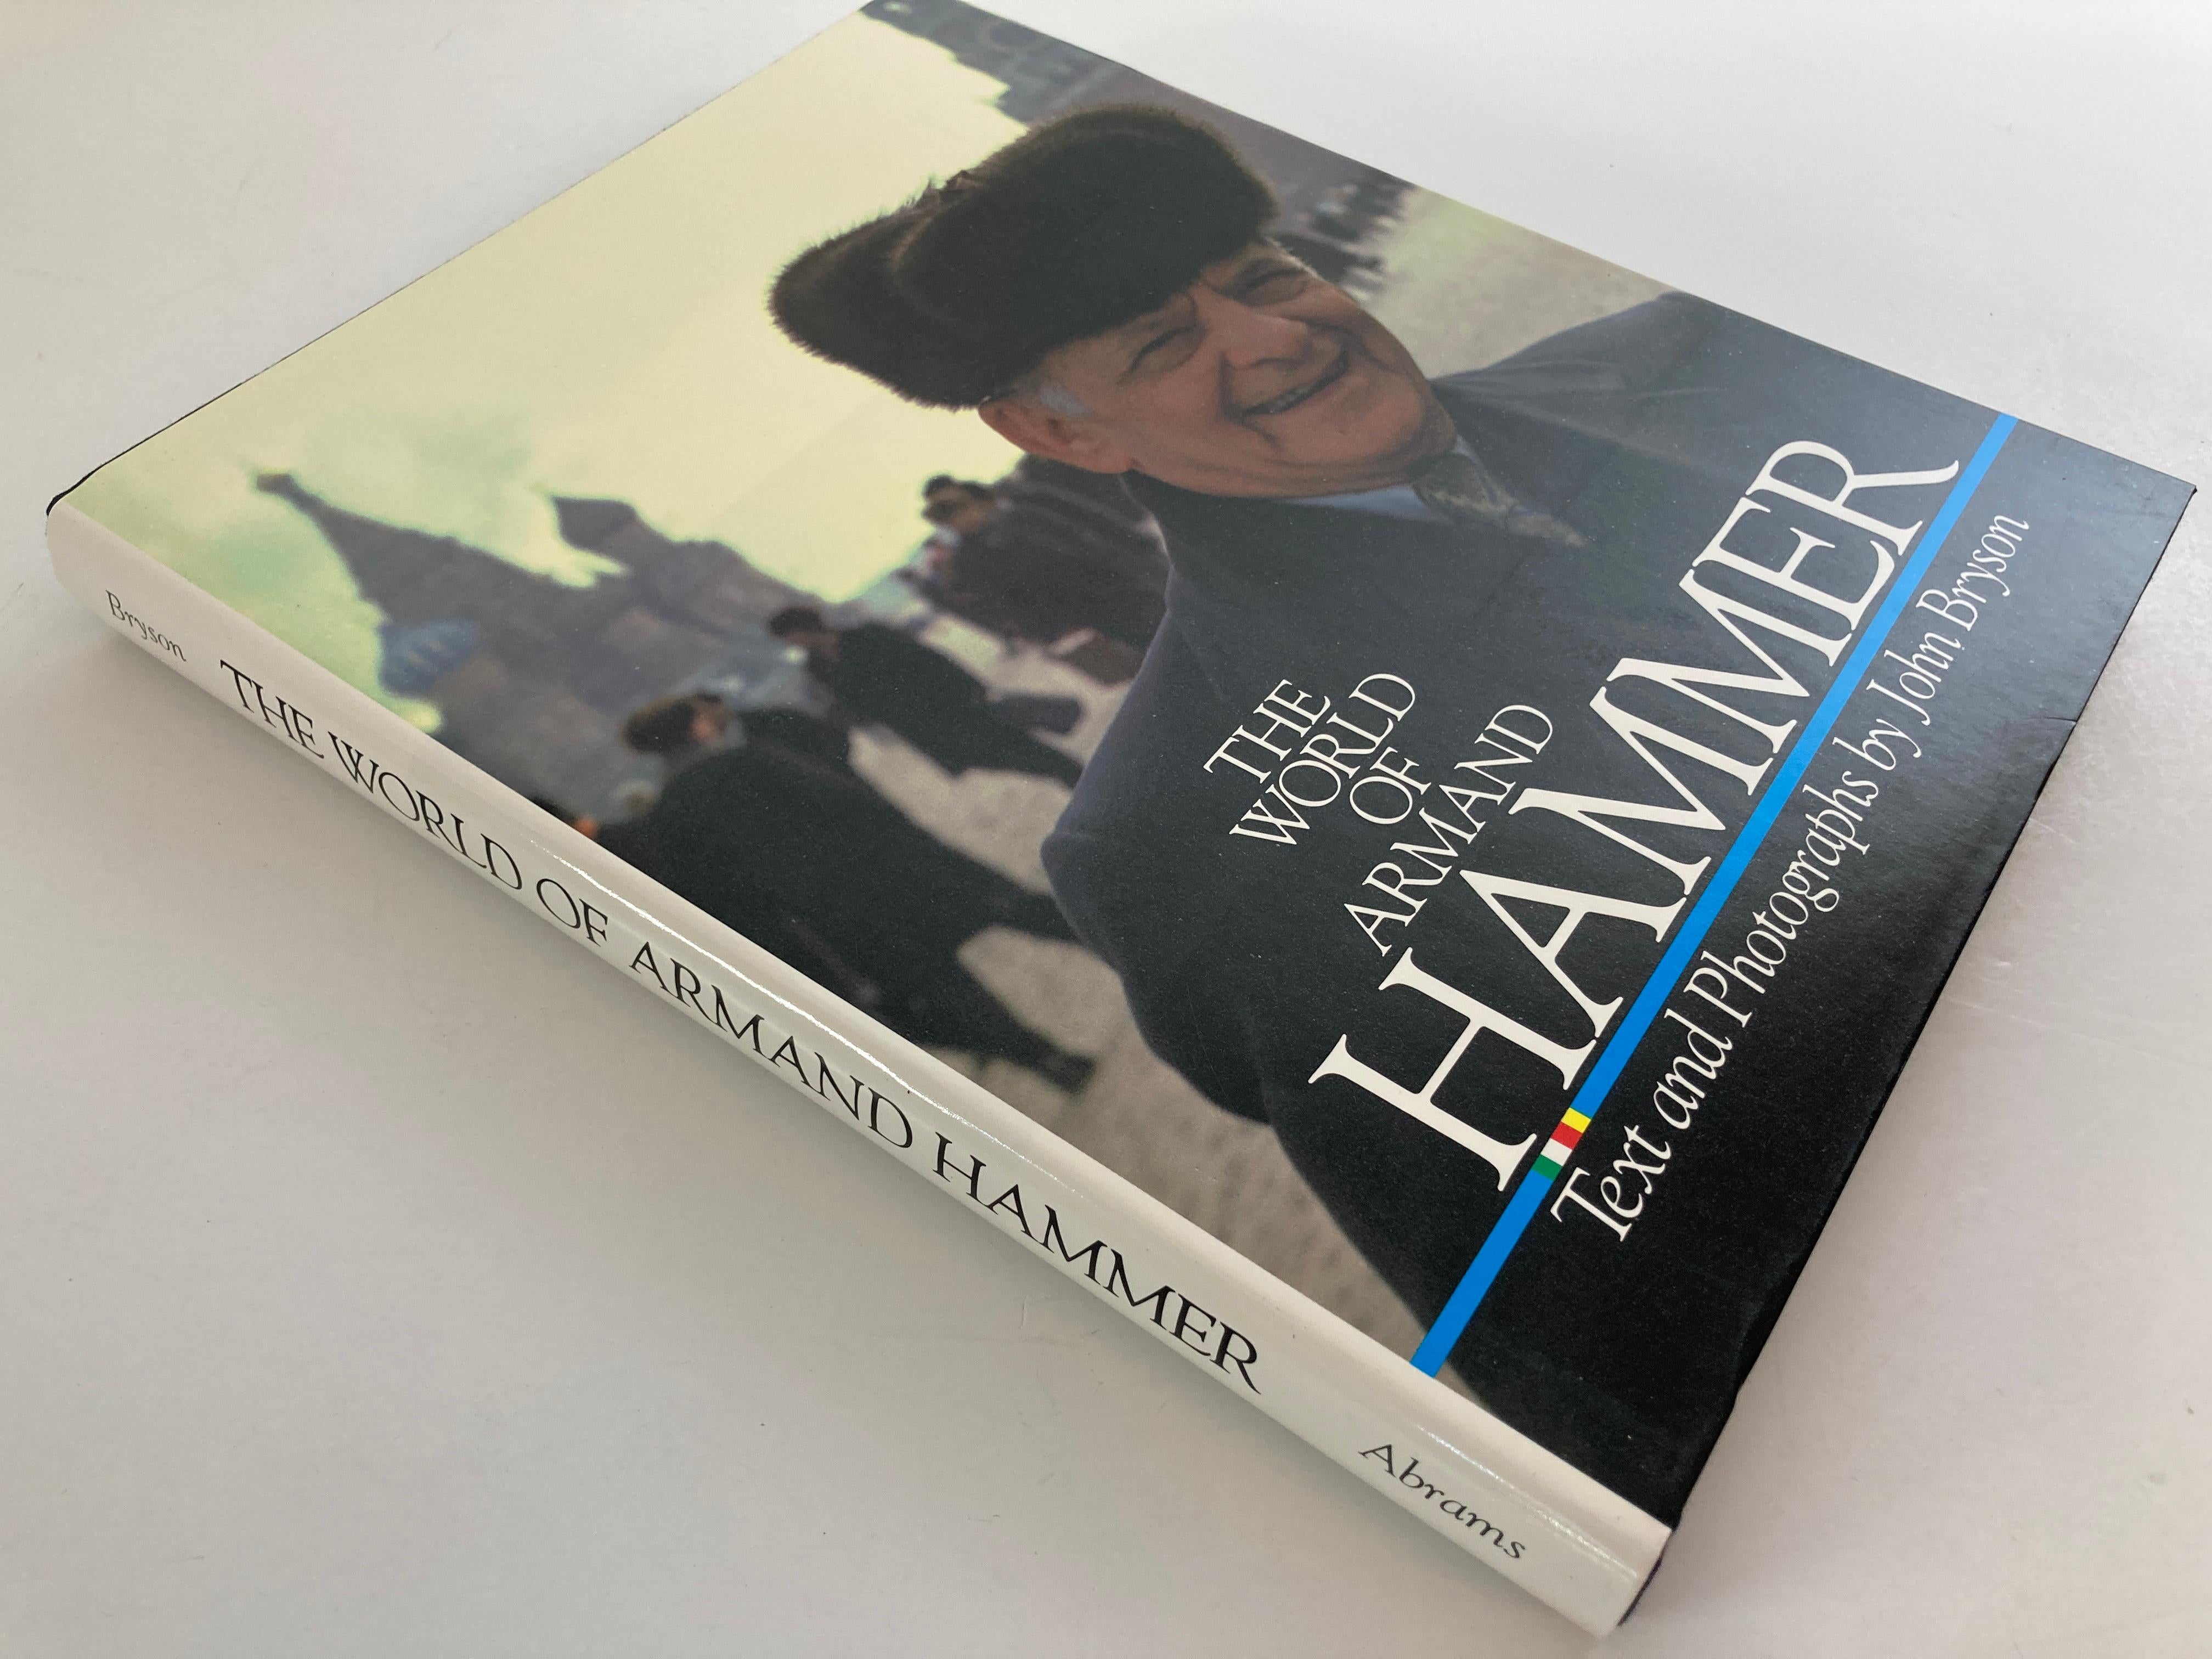 The World of Armand Hammer by John Bryson -
Large hardcover coffee table book.
A photographic journal follows the eighty-seven year old oil executive as he chairs a panel devoted to cancer research, holds exhibitions of his art collections, and